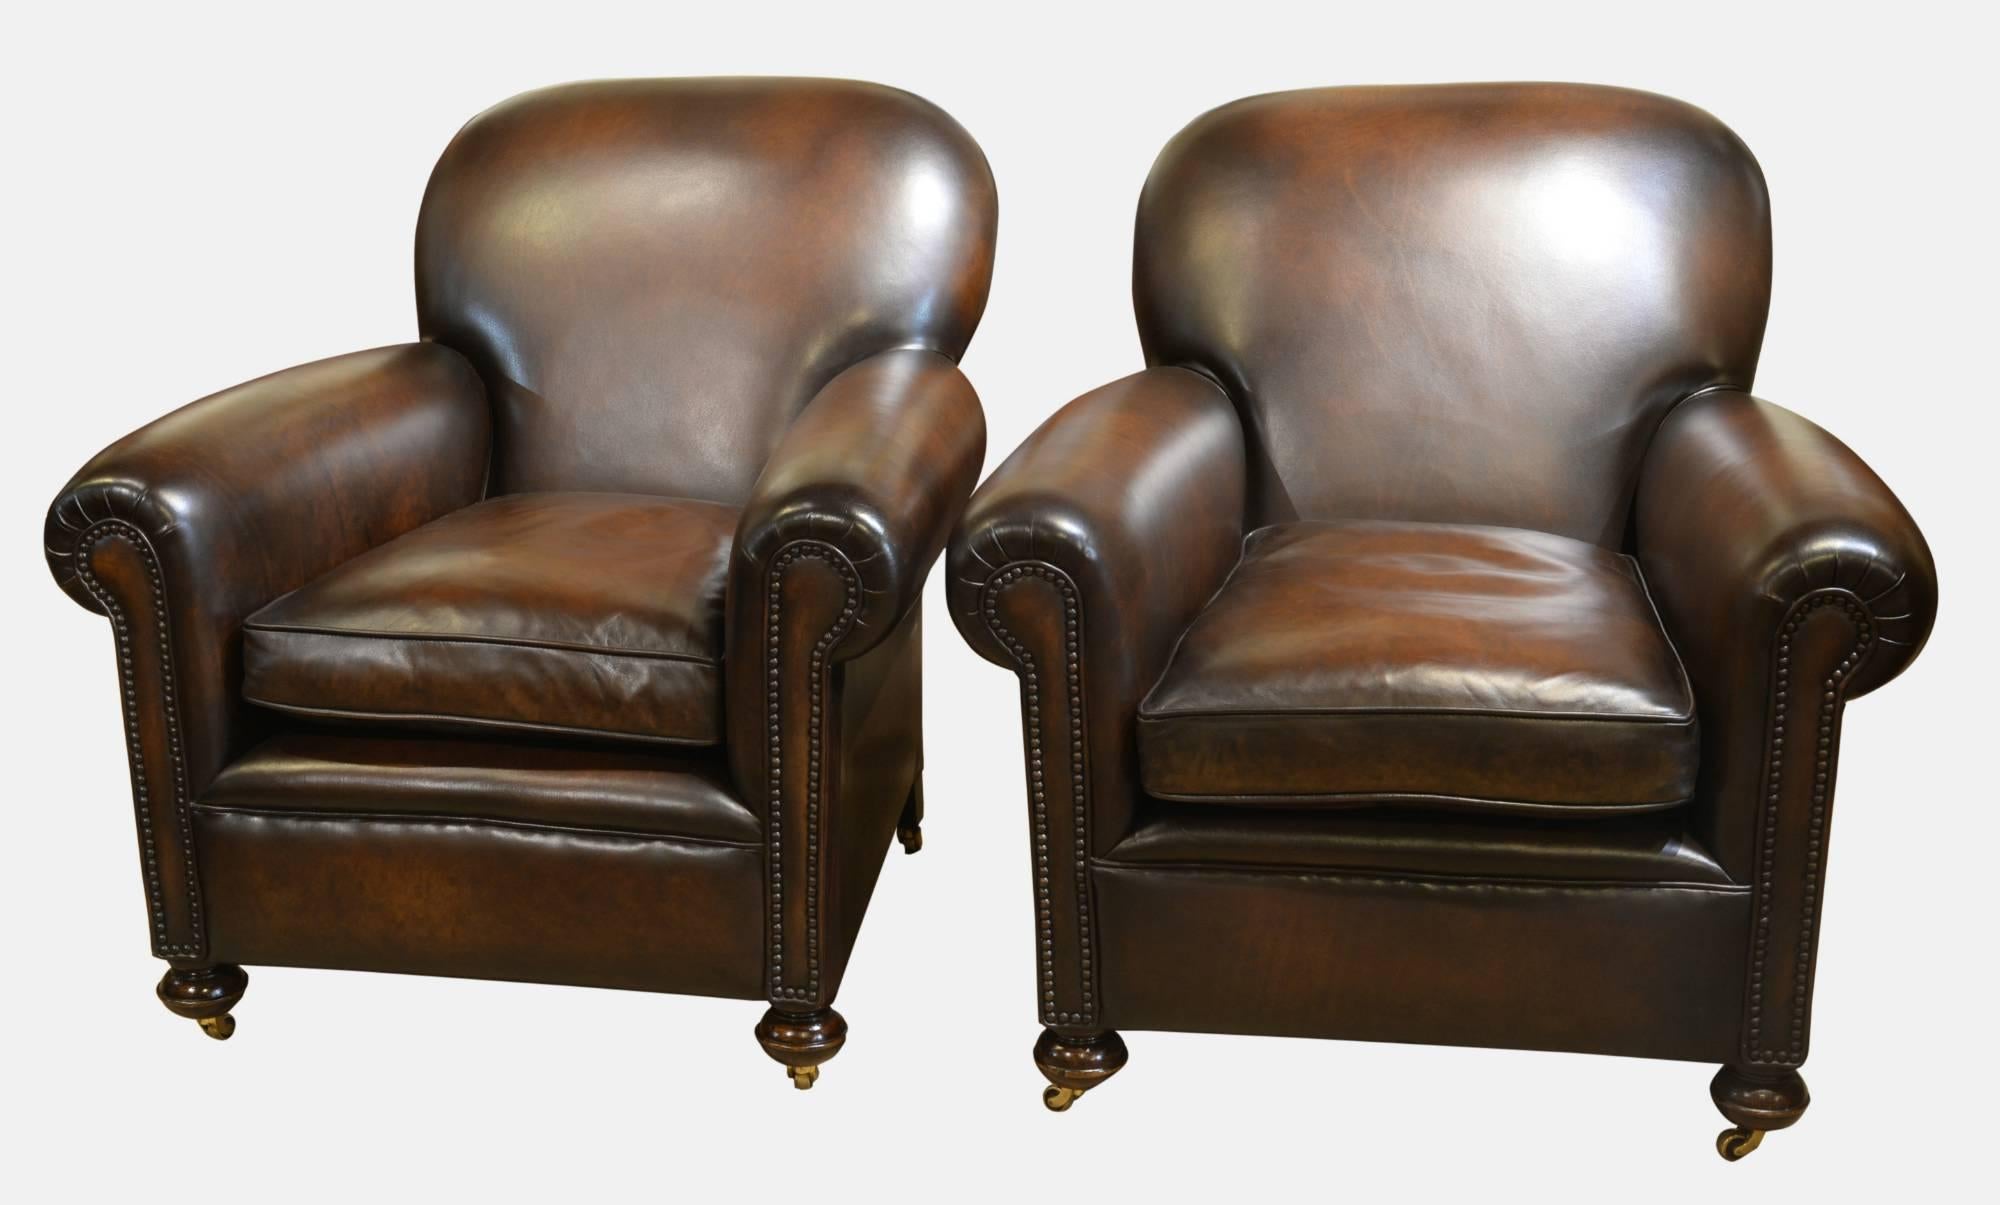 Pair of leather club chairs. Reupholstered in antique hide,

circa 1920.